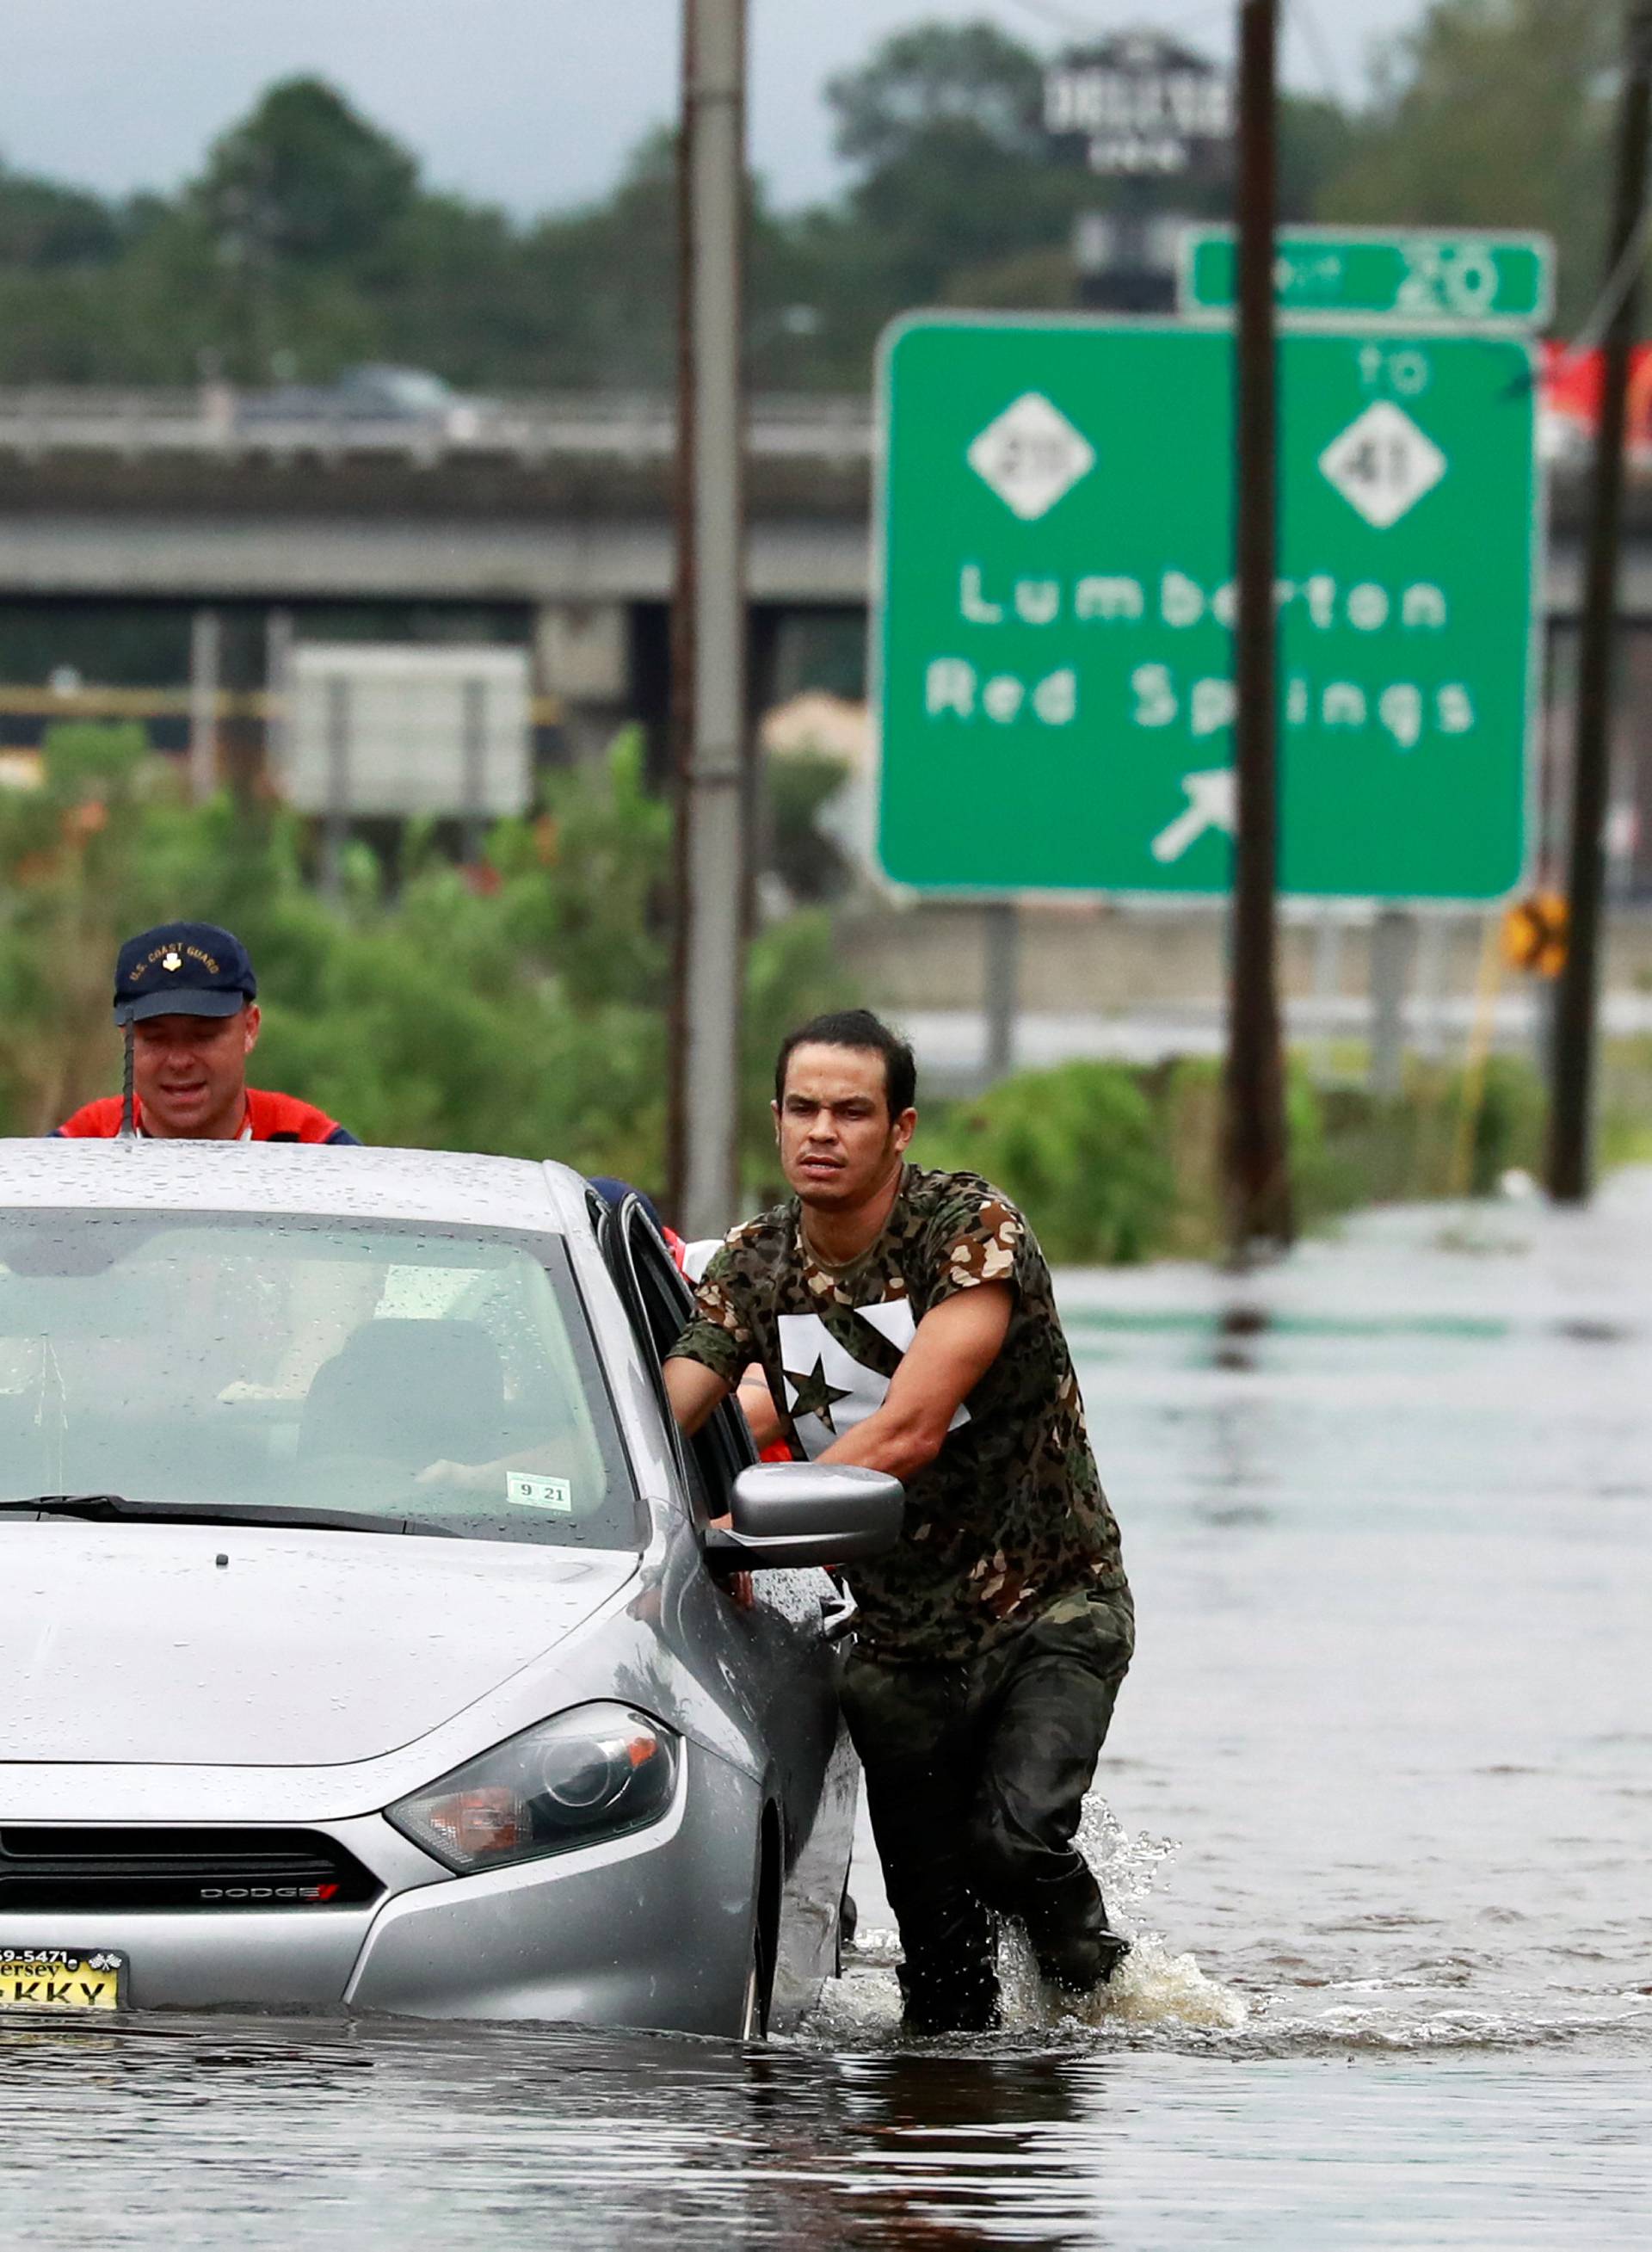 Members of the Coast Guard help a stranded motorist in the flood waters caused by Hurricane Florence in Lumberton